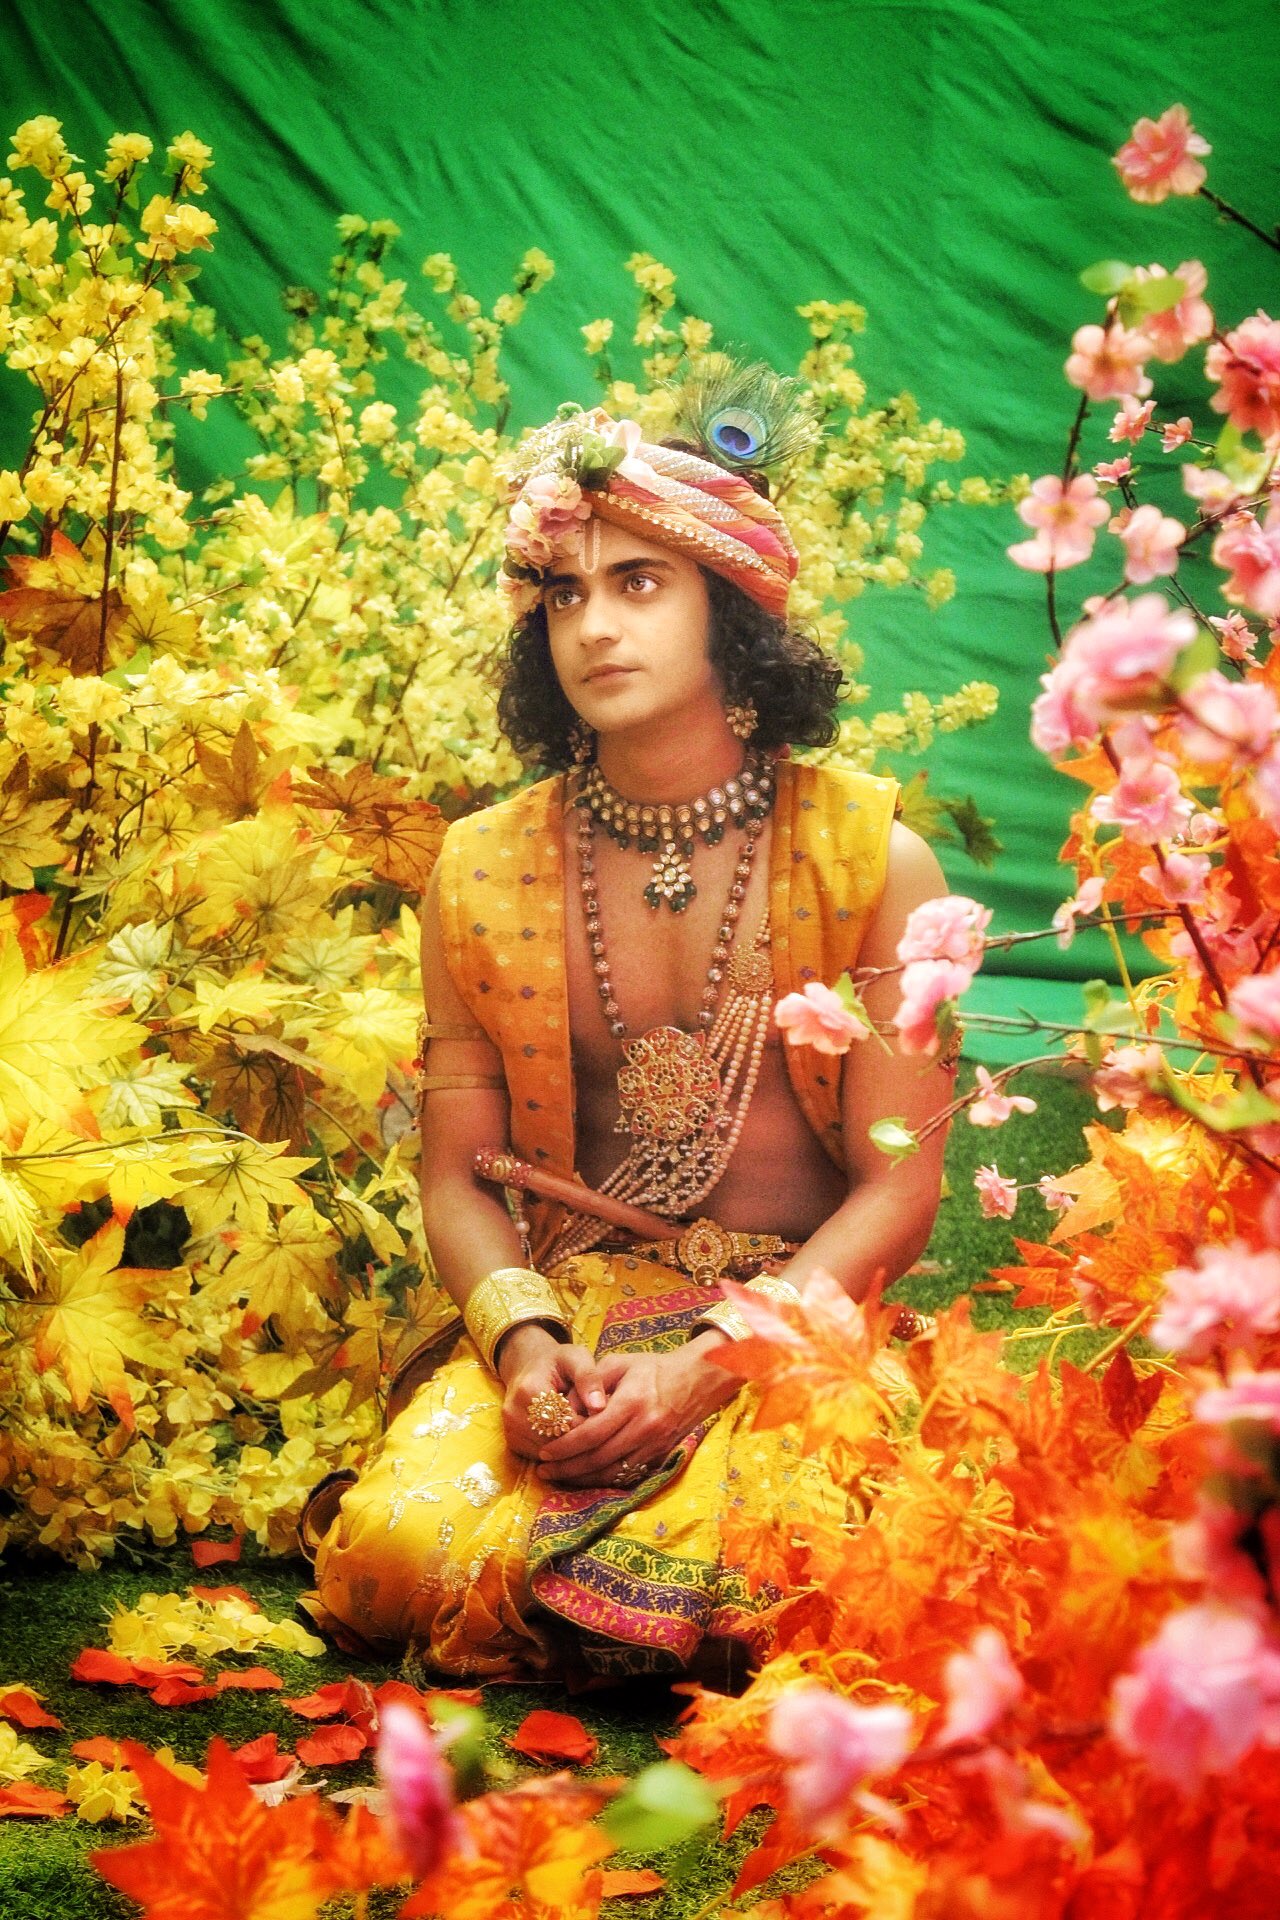 Sumedh vasudev mudgalkar on afterall peace is what we seek peace is what we wish for everybody ðâ httpstcoivxidwn